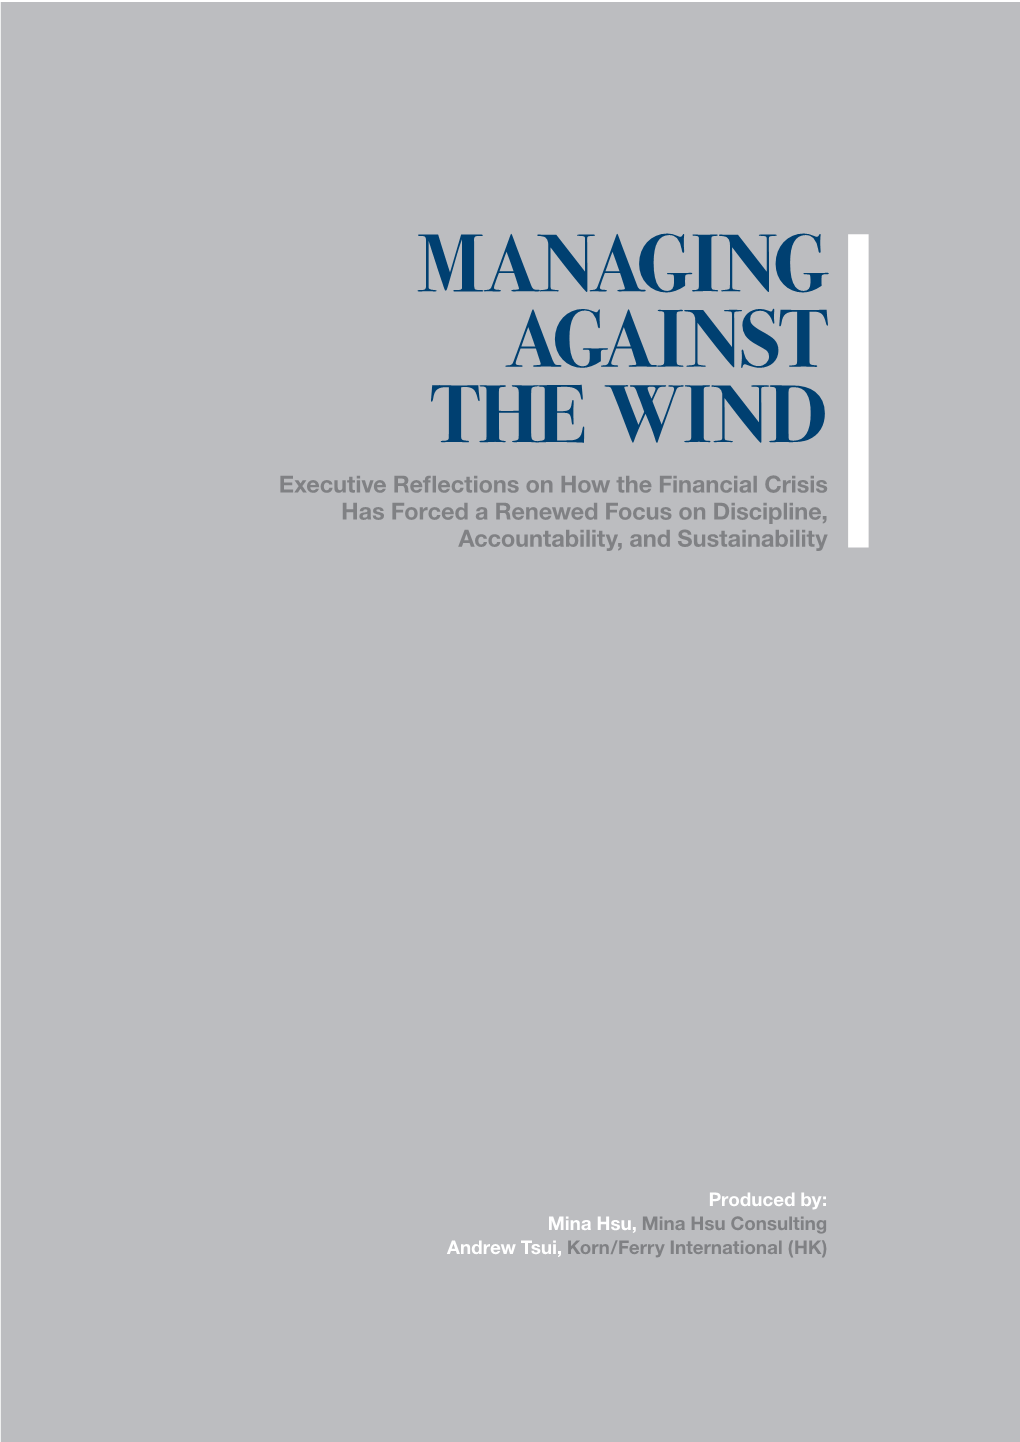 MANAGING AGAINST the WIND Executive Reﬂections on How the Financial Crisis Has Forced a Renewed Focus on Discipline, Accountability, and Sustainability